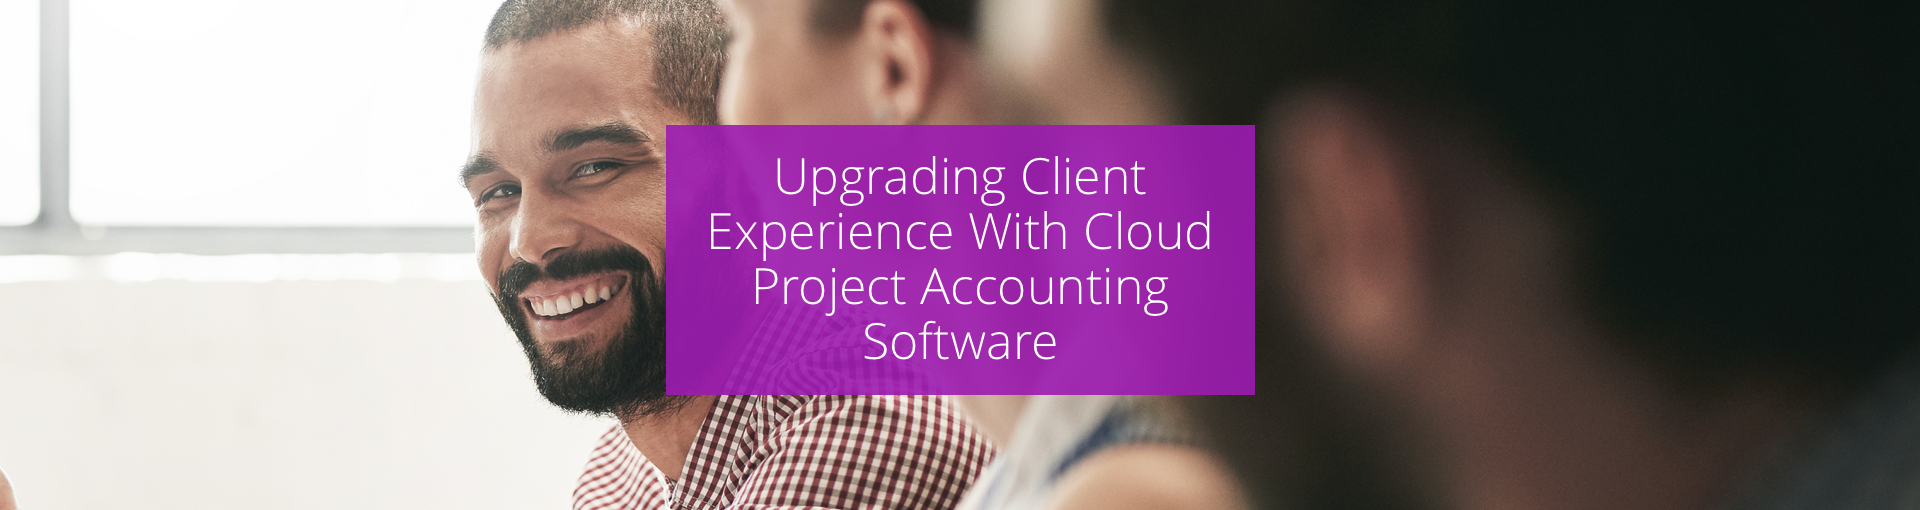 Upgrading Client Experience With Cloud Project Accounting Software Featured Image